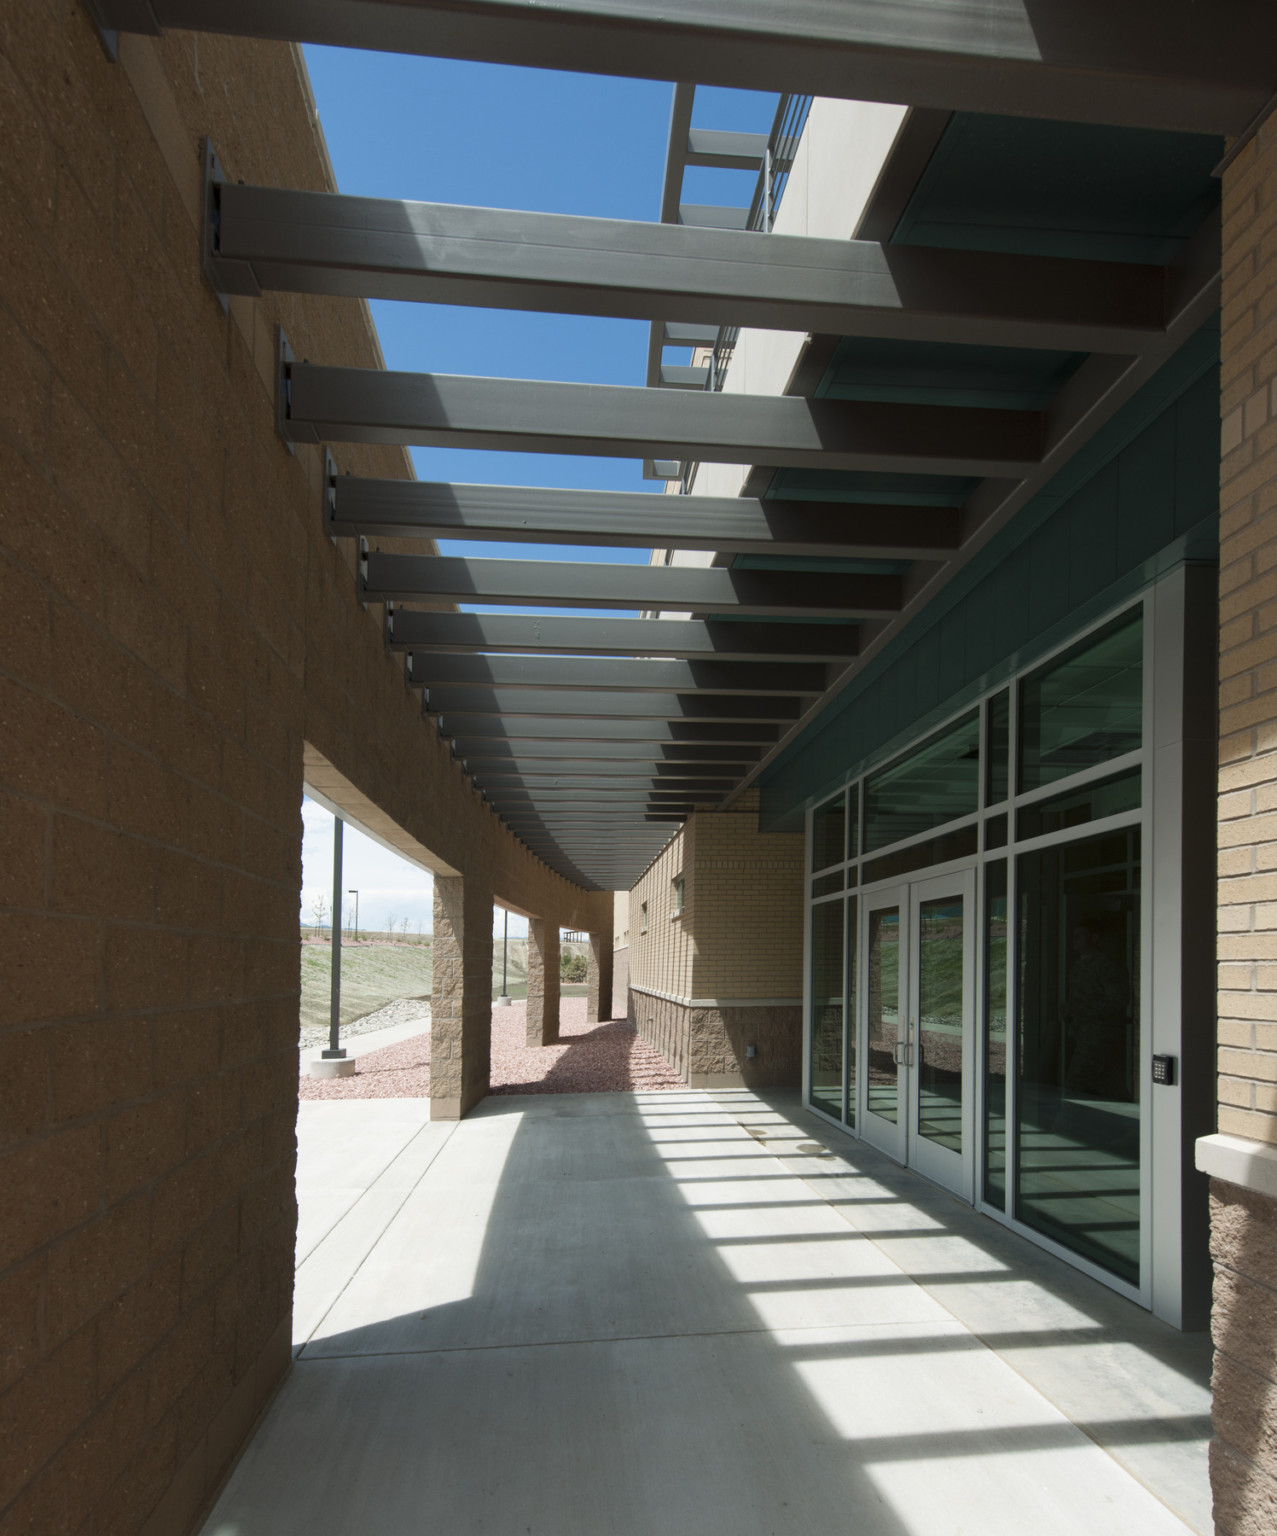 concrete walkway along a brick building and glass front entry shaded by metal fin canopy. blue sky above